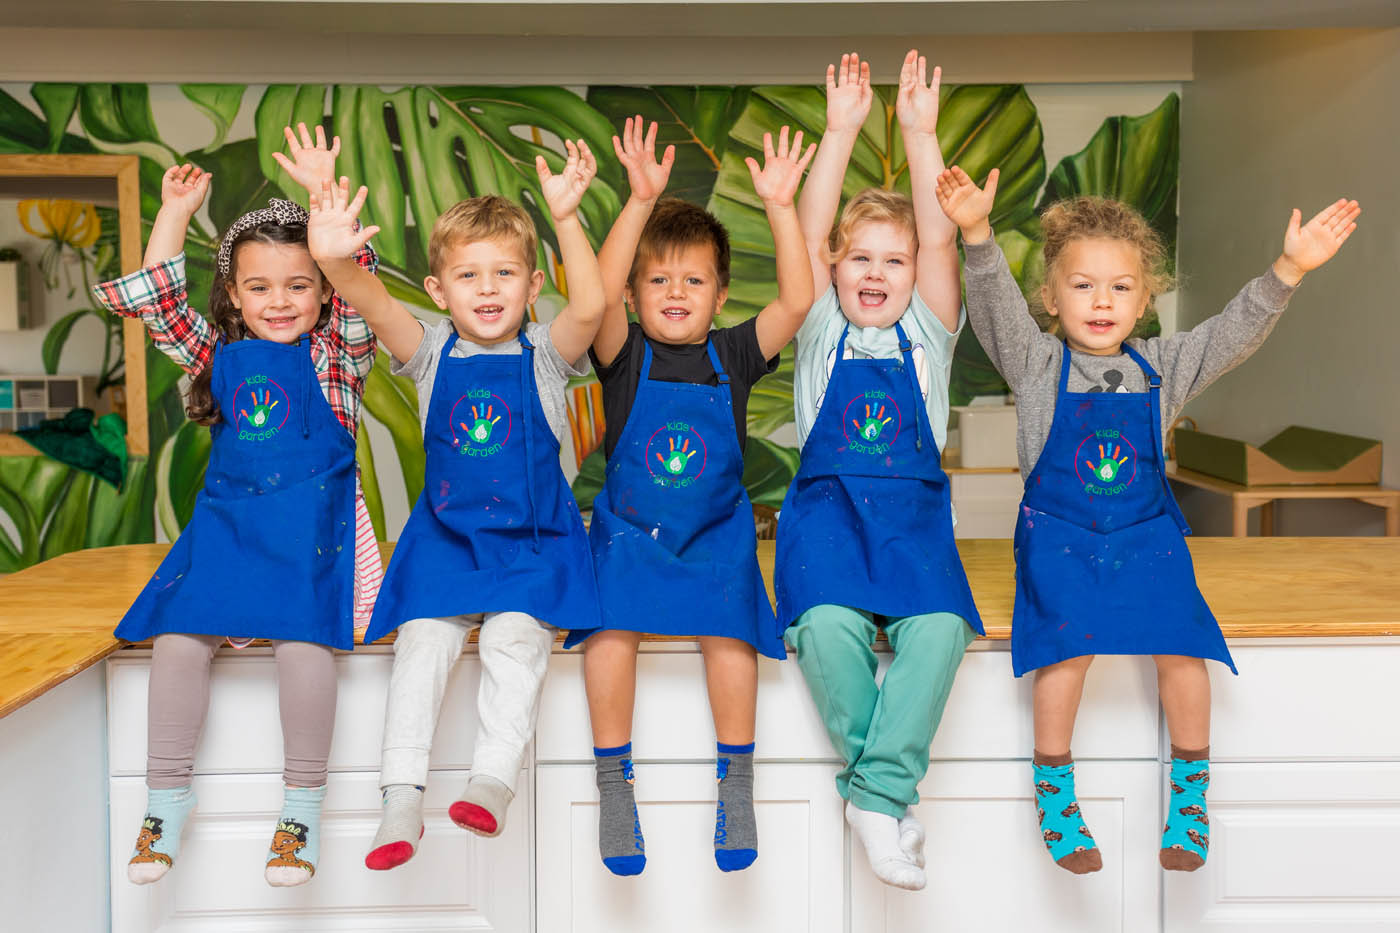 Kids in blue aprons at Kids Garden Columbia learning center.